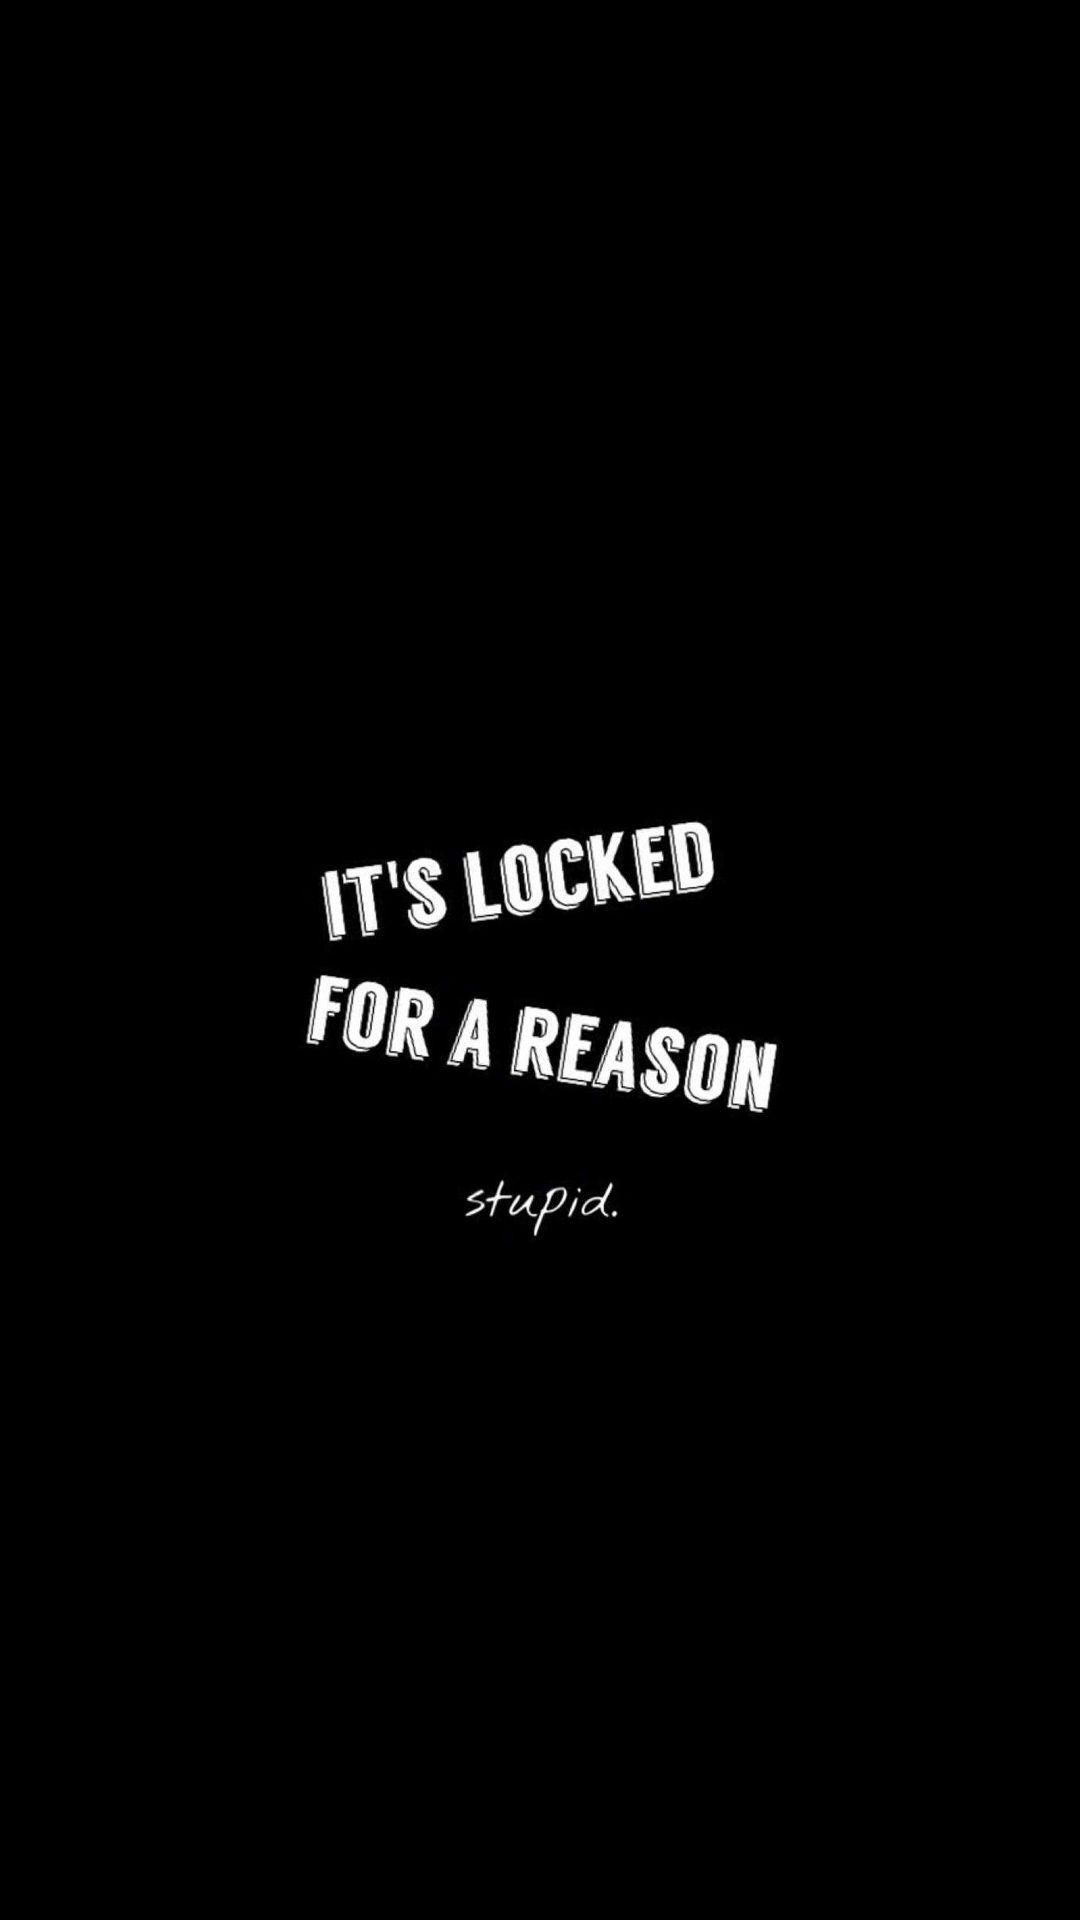 Locked For A Reason Stupid Android Wallpaper. Mobile wallpaper